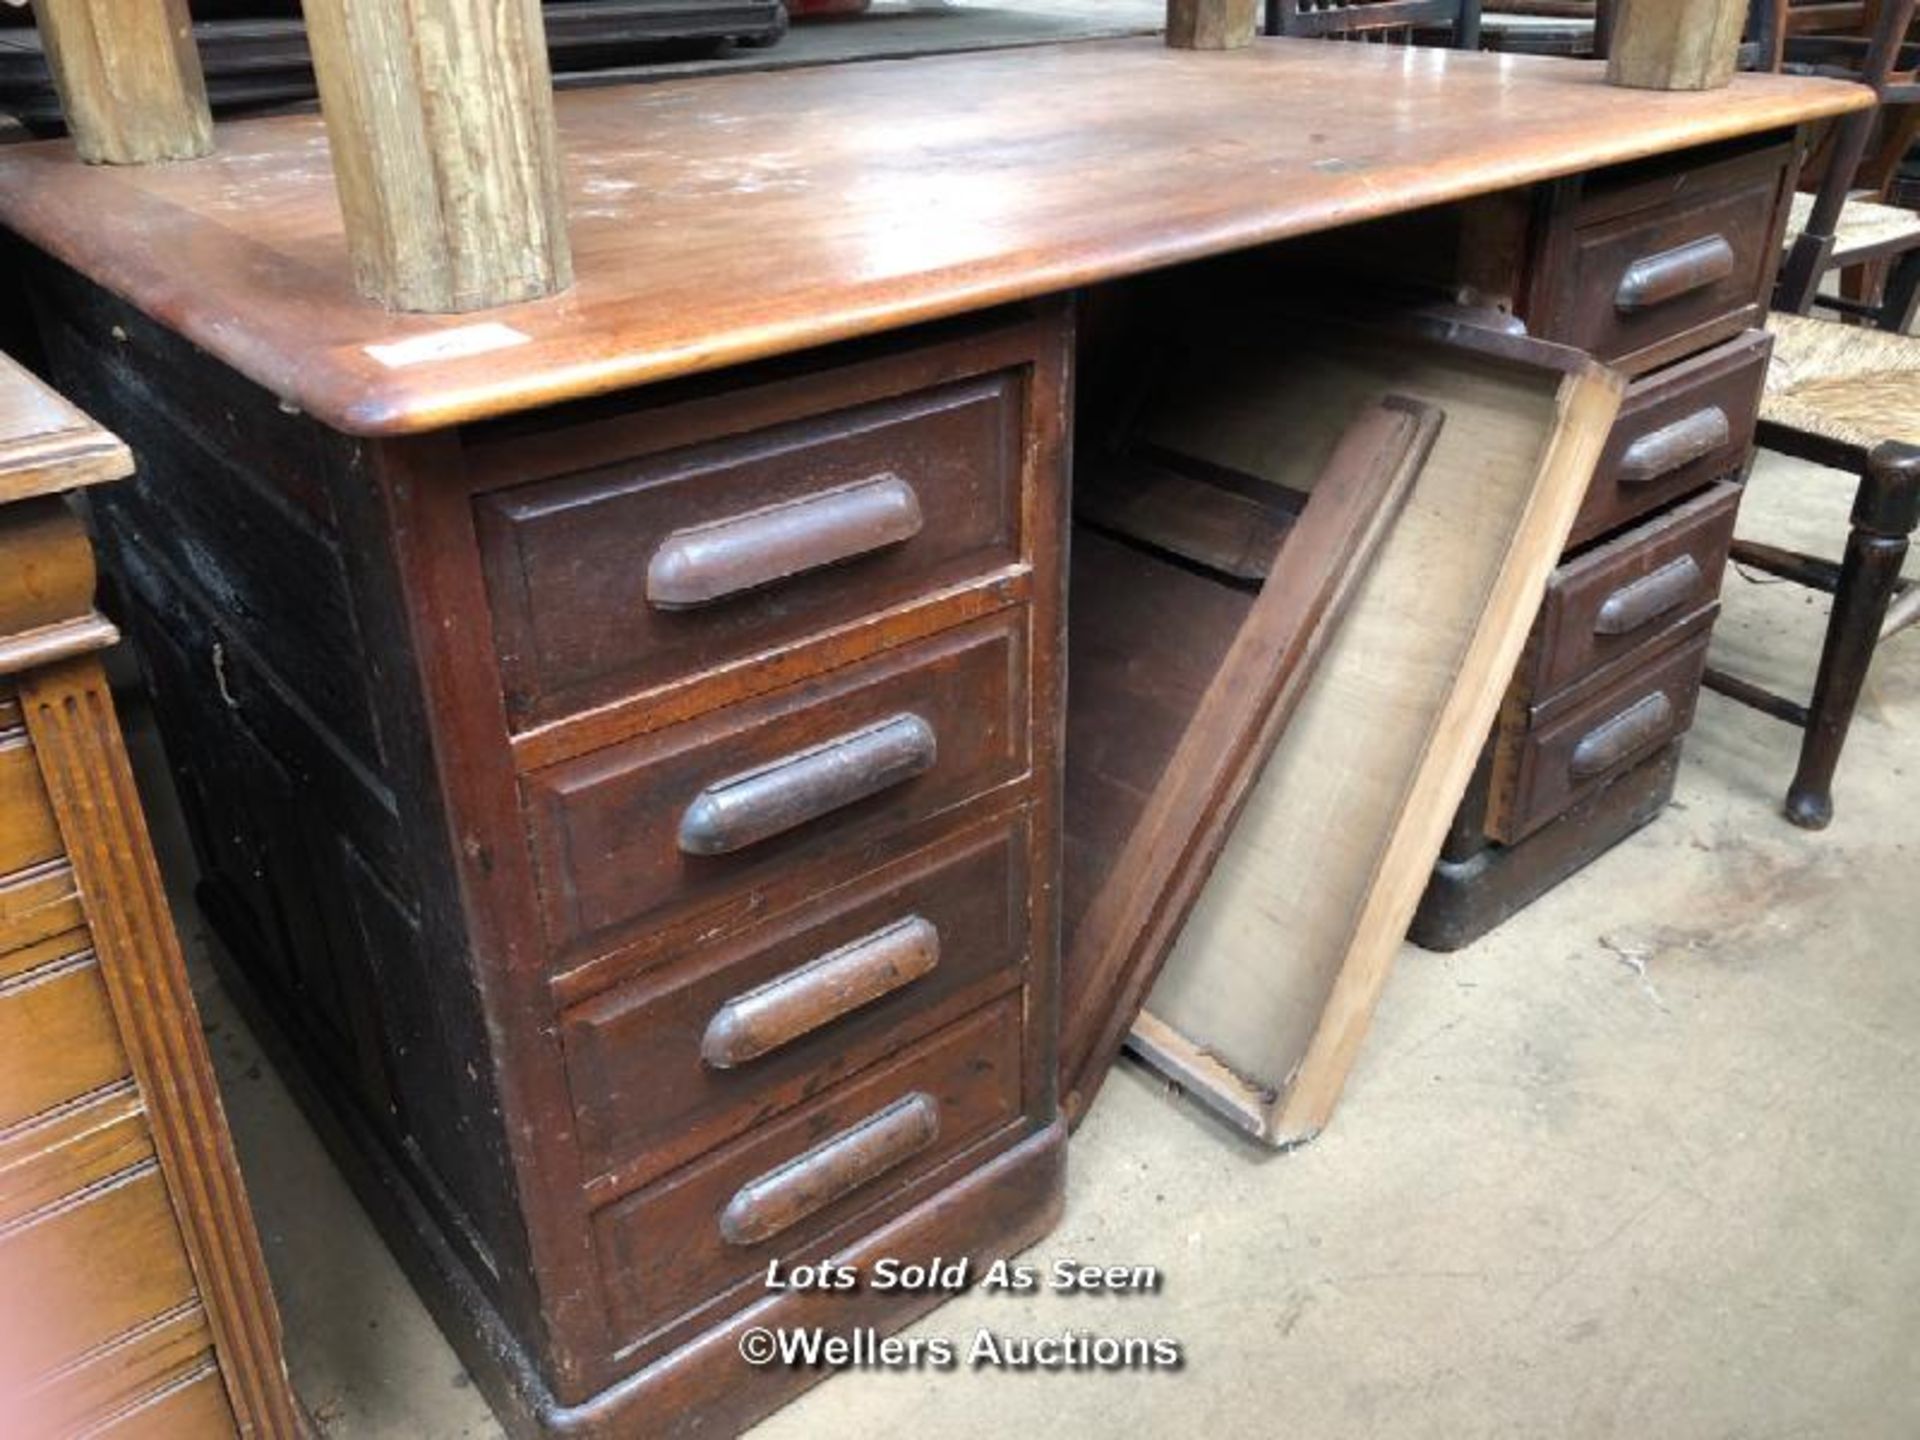 BOTTOM SECTION OF A ROLL TOP DESK WITH NINE DRAWERS (A/F), 55 X 32 X 30 INCHES / LOCATED AT VICTORIA